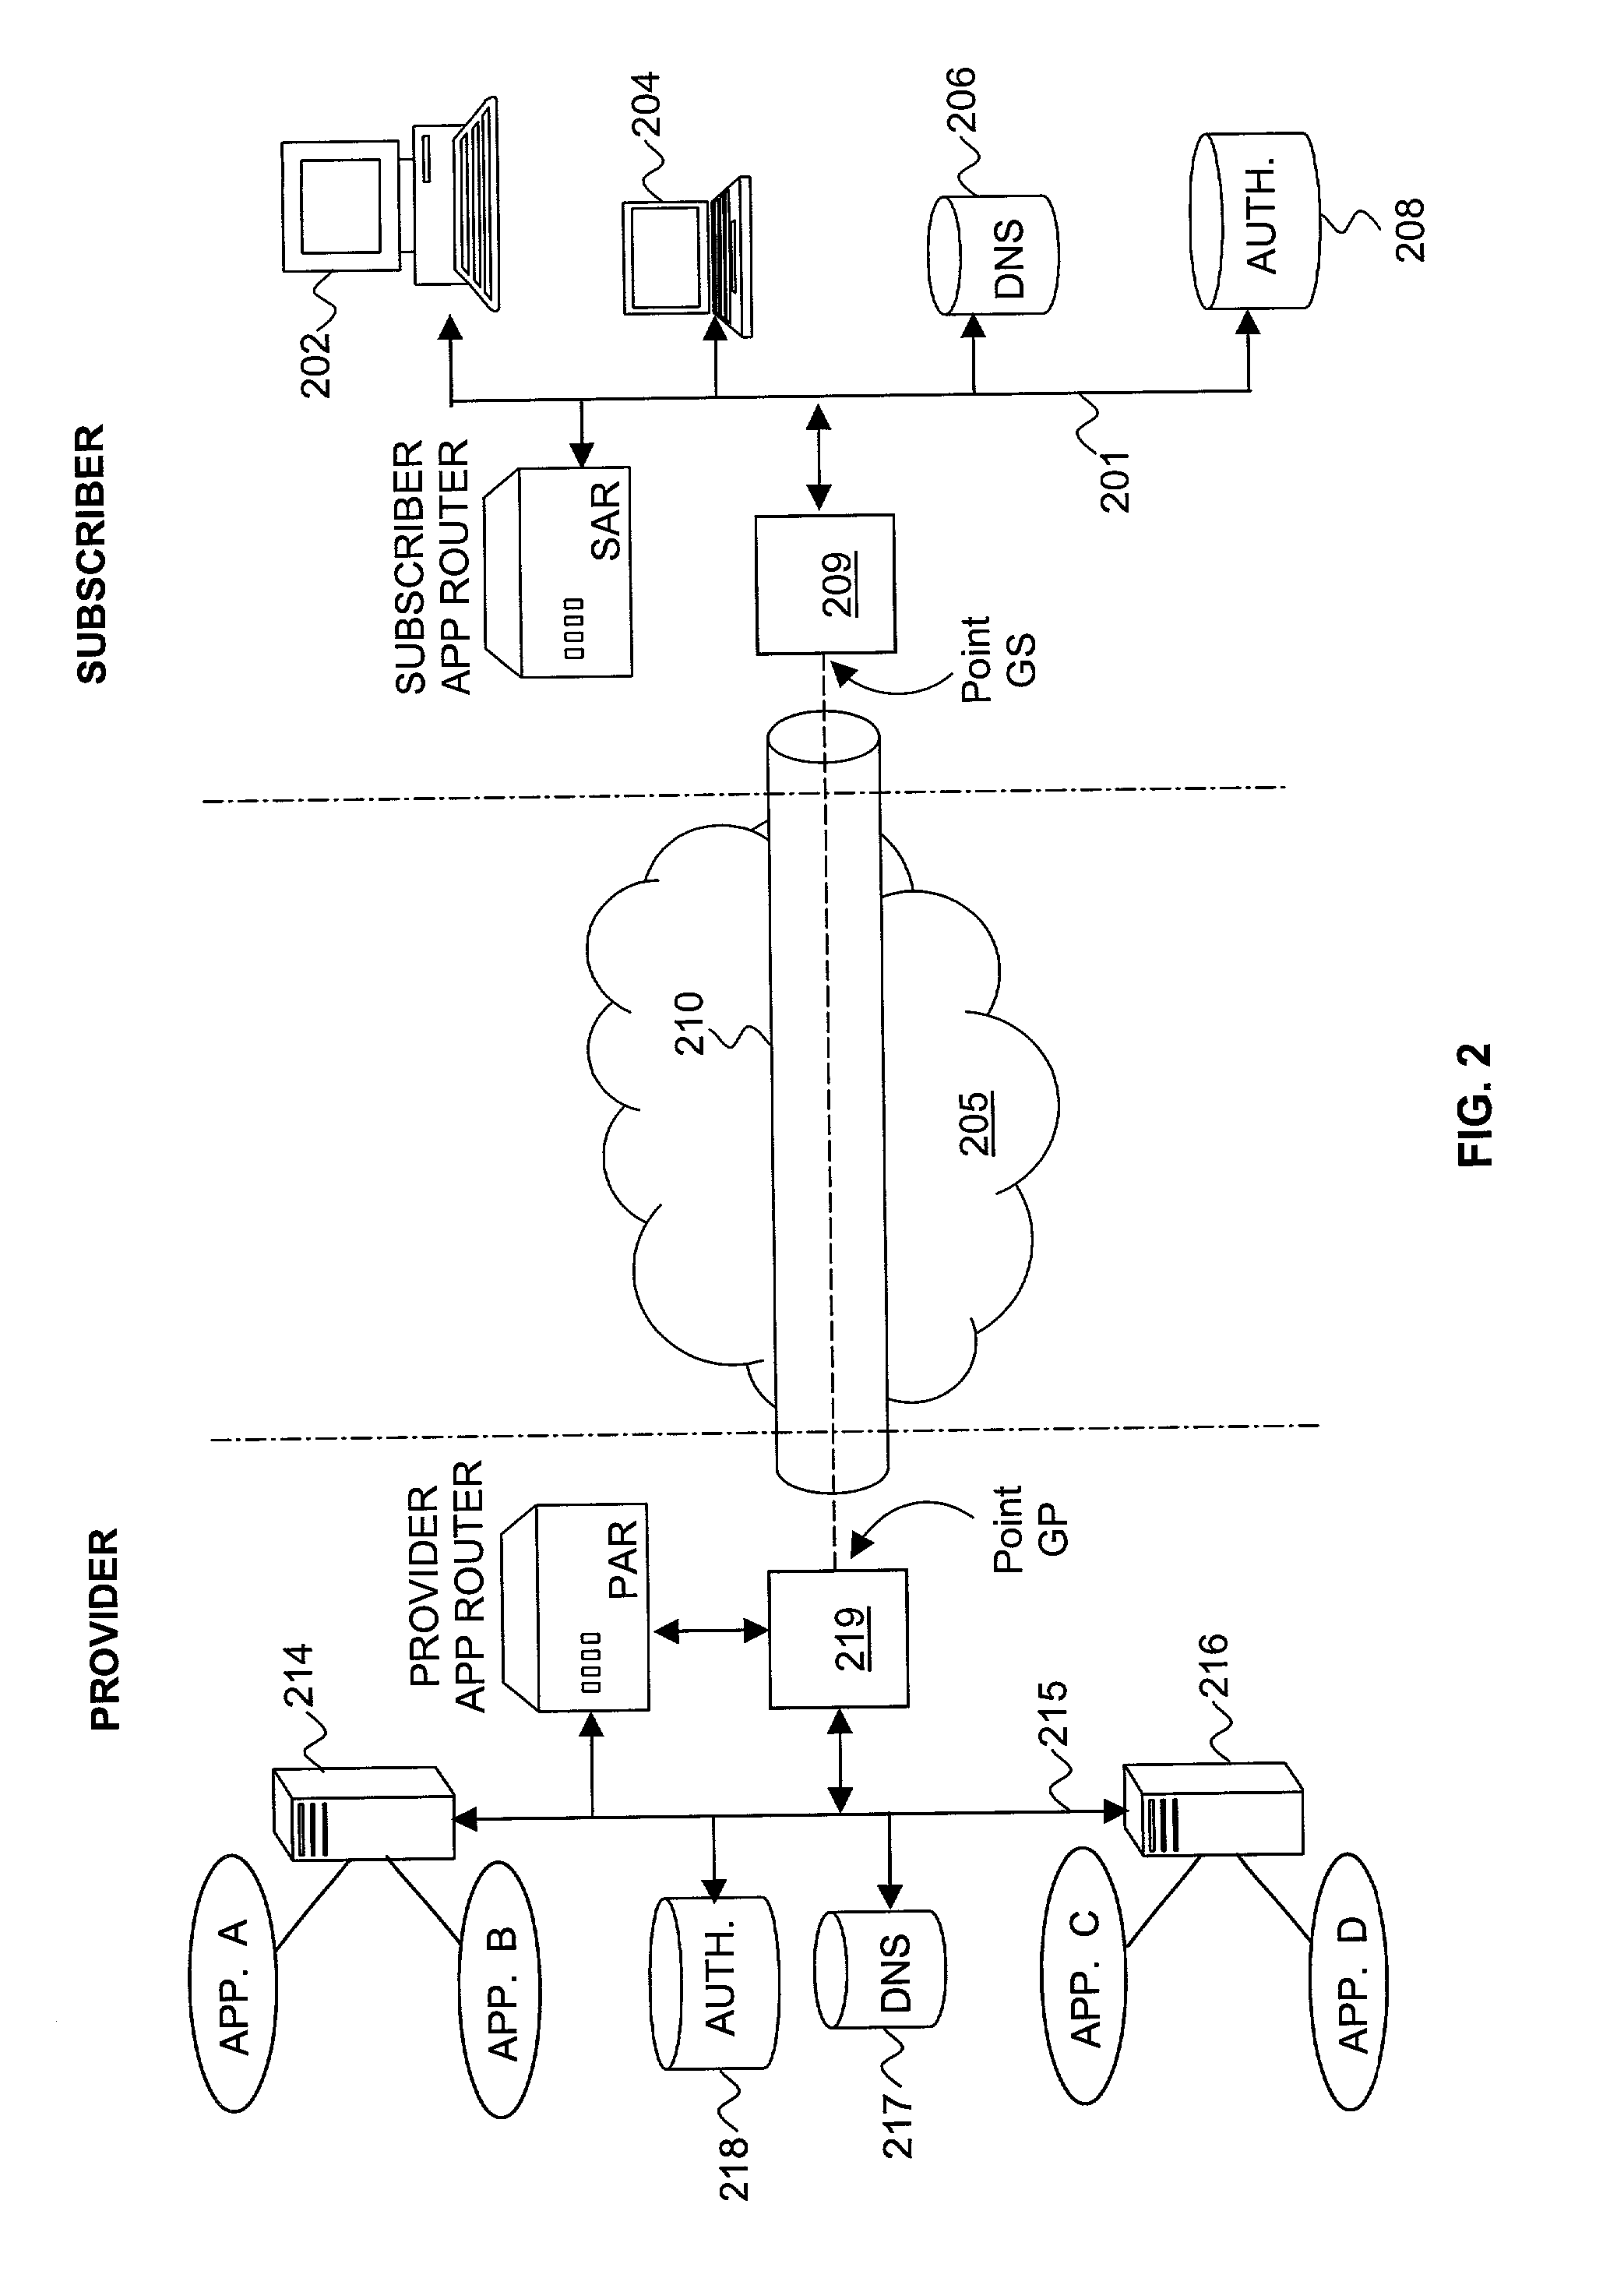 Method and apparatus for providing network dependent application services